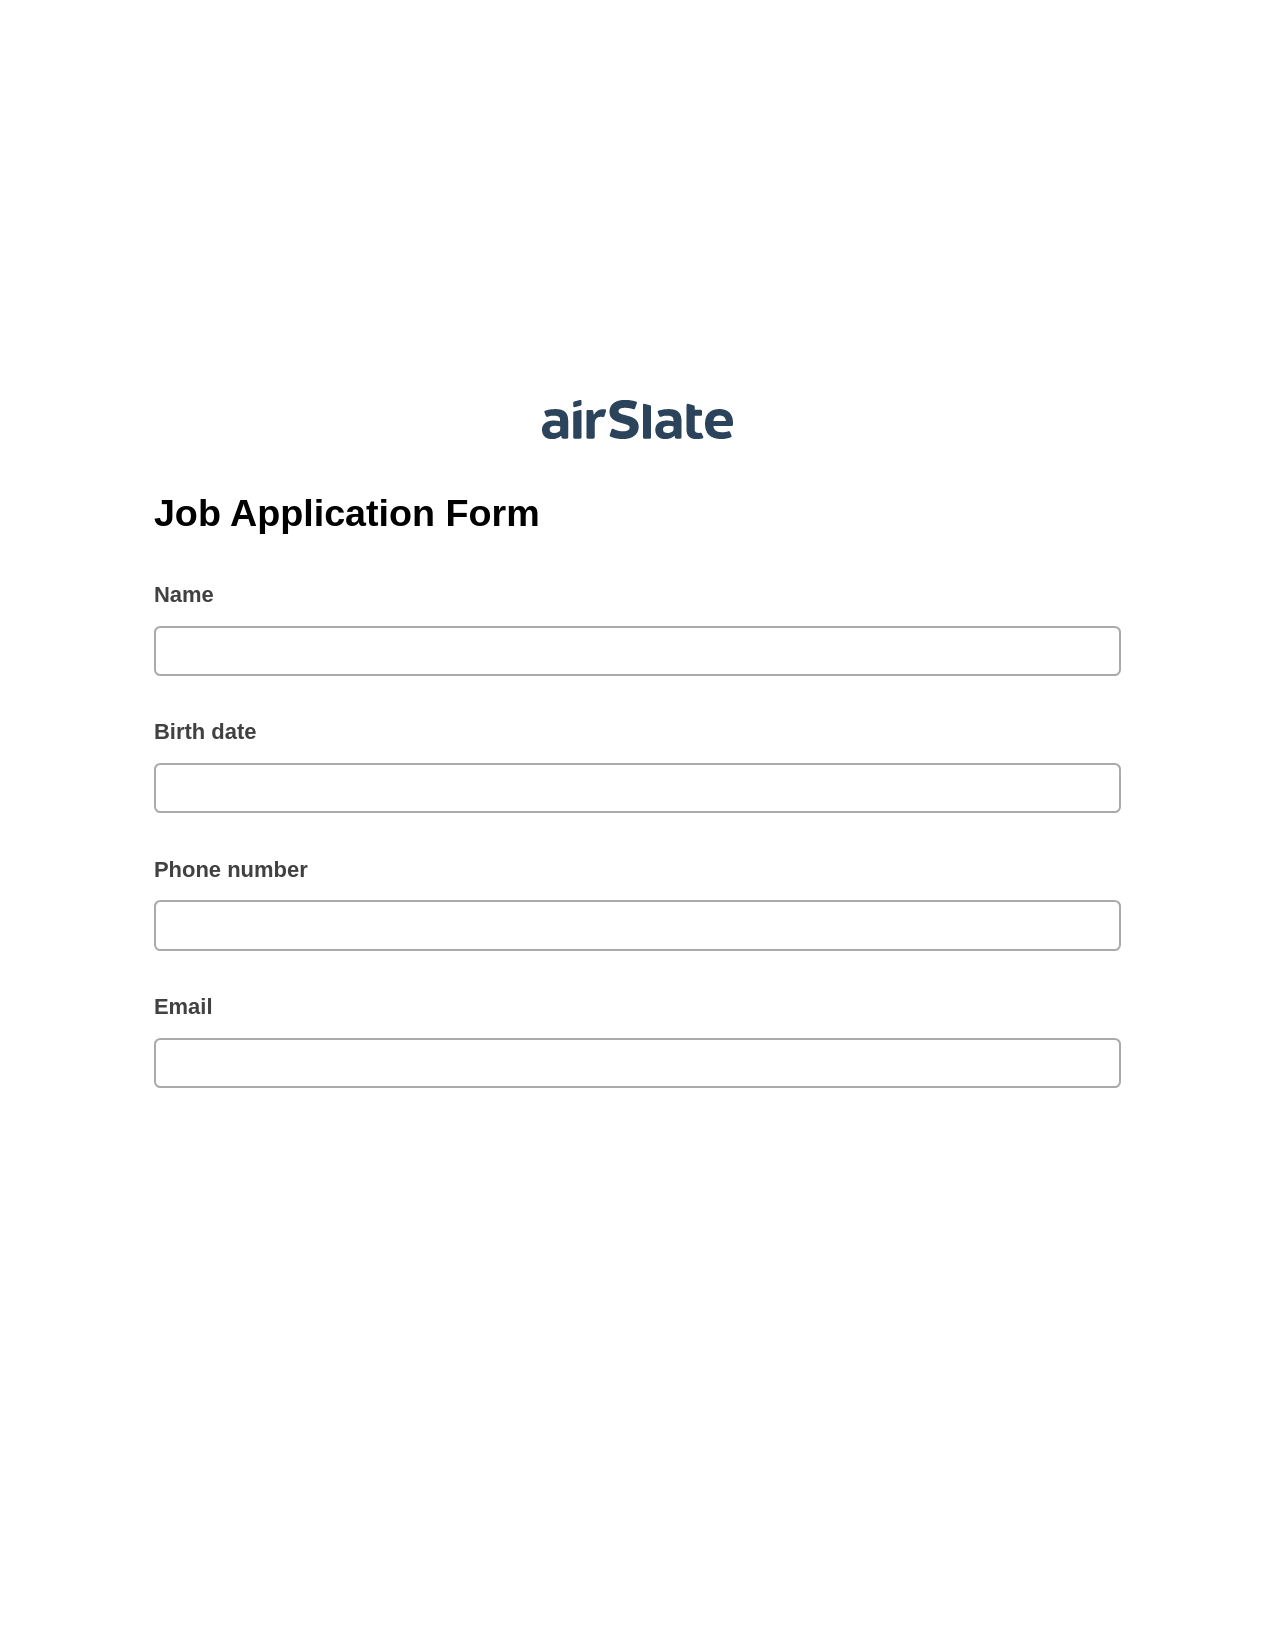 Multirole Job Application Form Pre-fill from NetSuite Records Bot, System Bot - Create a Slate in another Flow, Google Drive Bot